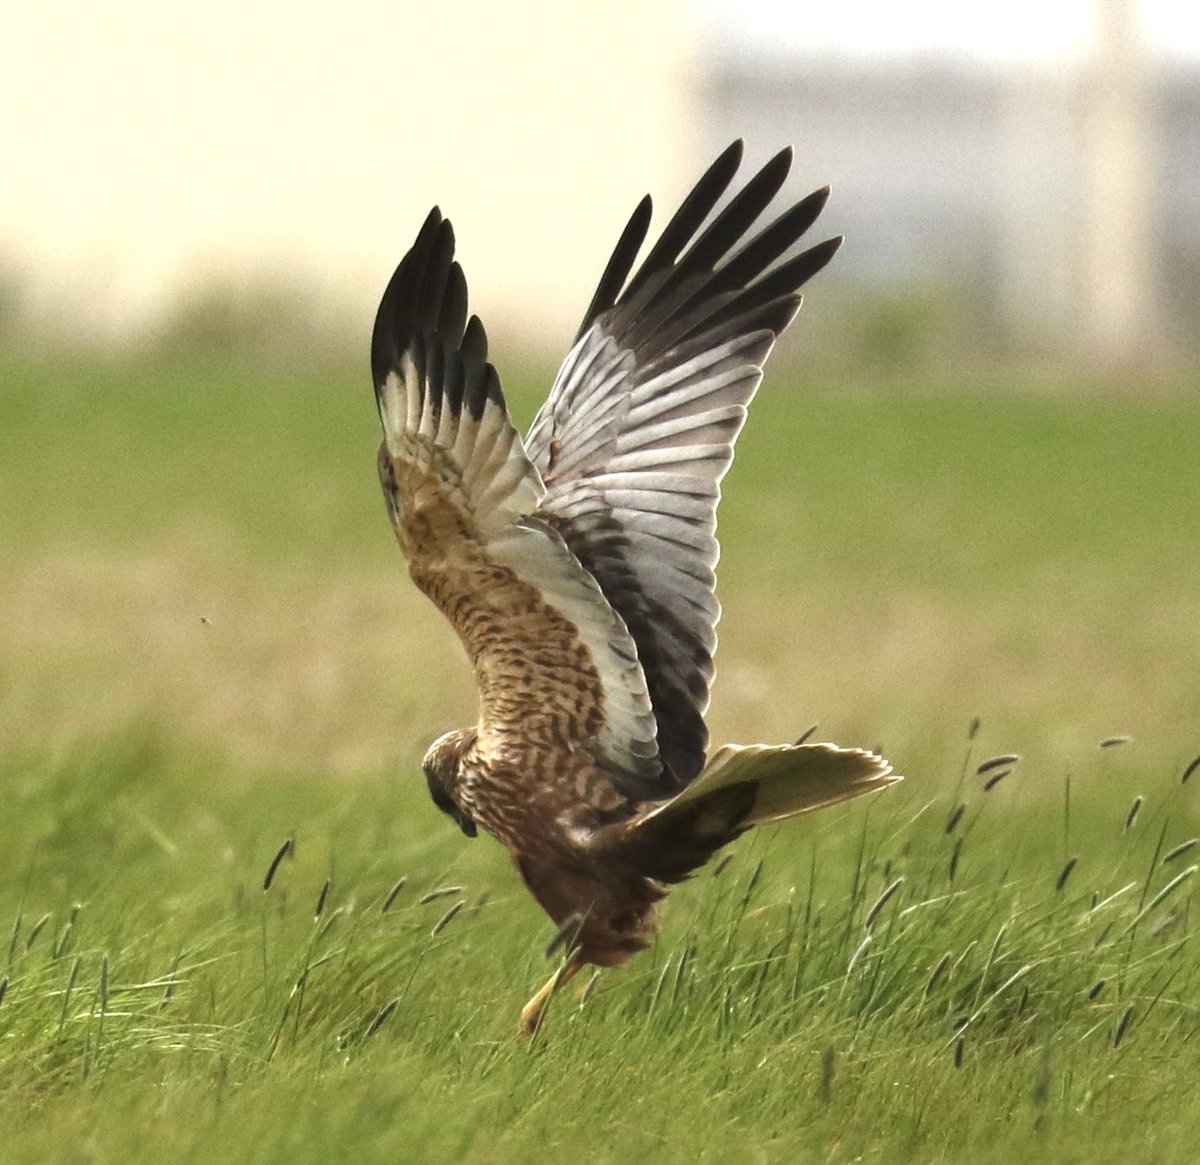 The Pounce: Marsh Harrier closing in on its prey. @_BTO